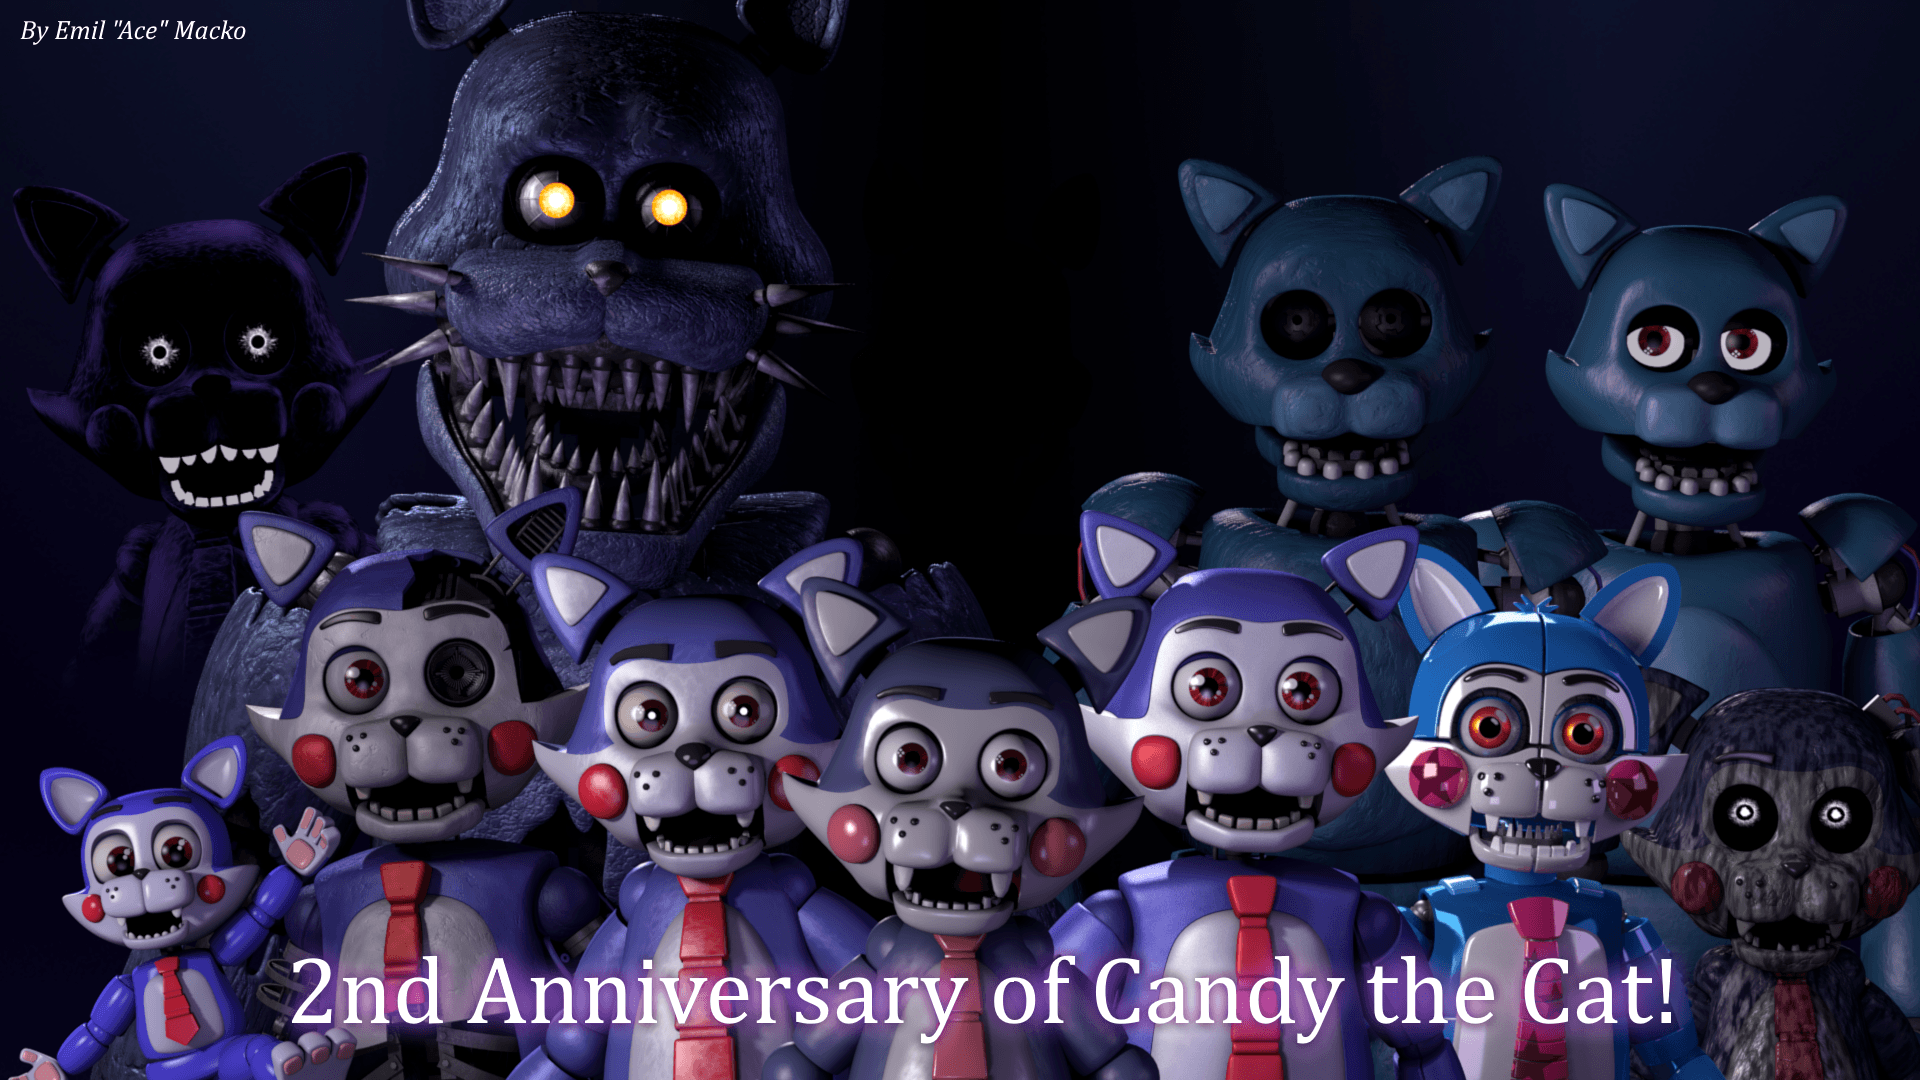 Five Nights at Candy's 3 Wallpaper by TDSpeedEditsandMore on